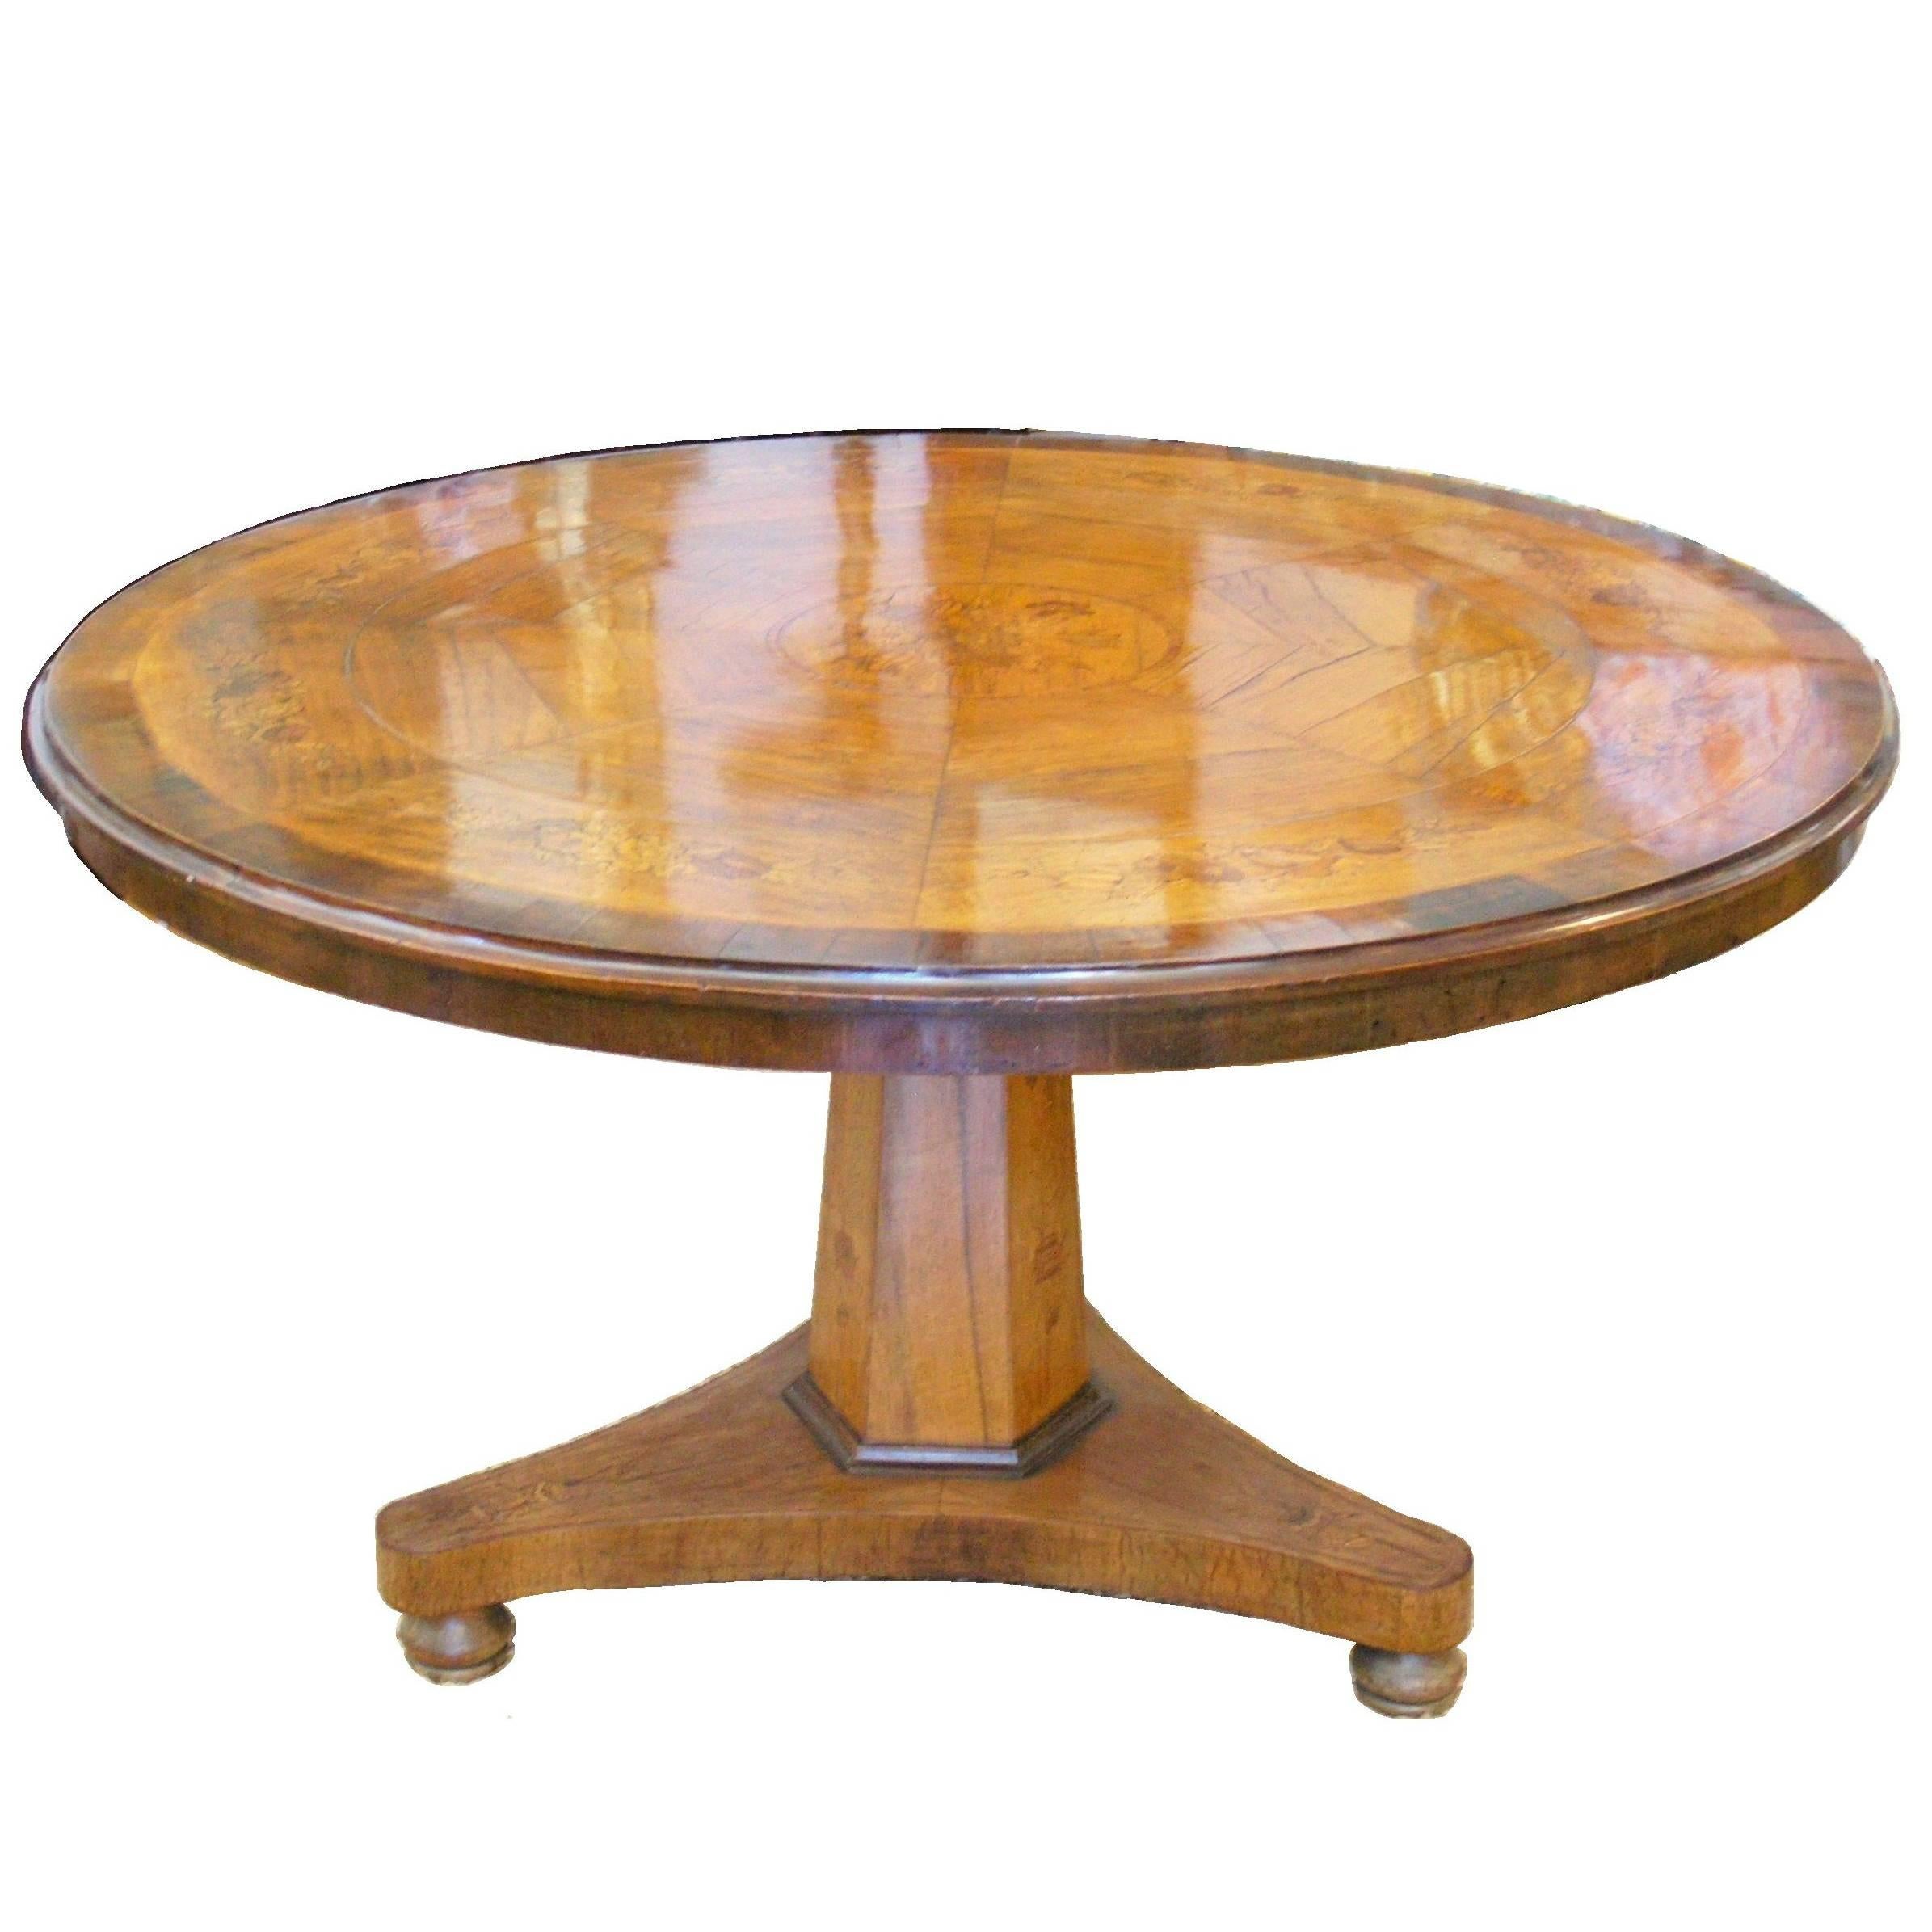 Italian Marquetry Inlaid Center Table 19th C. For Sale